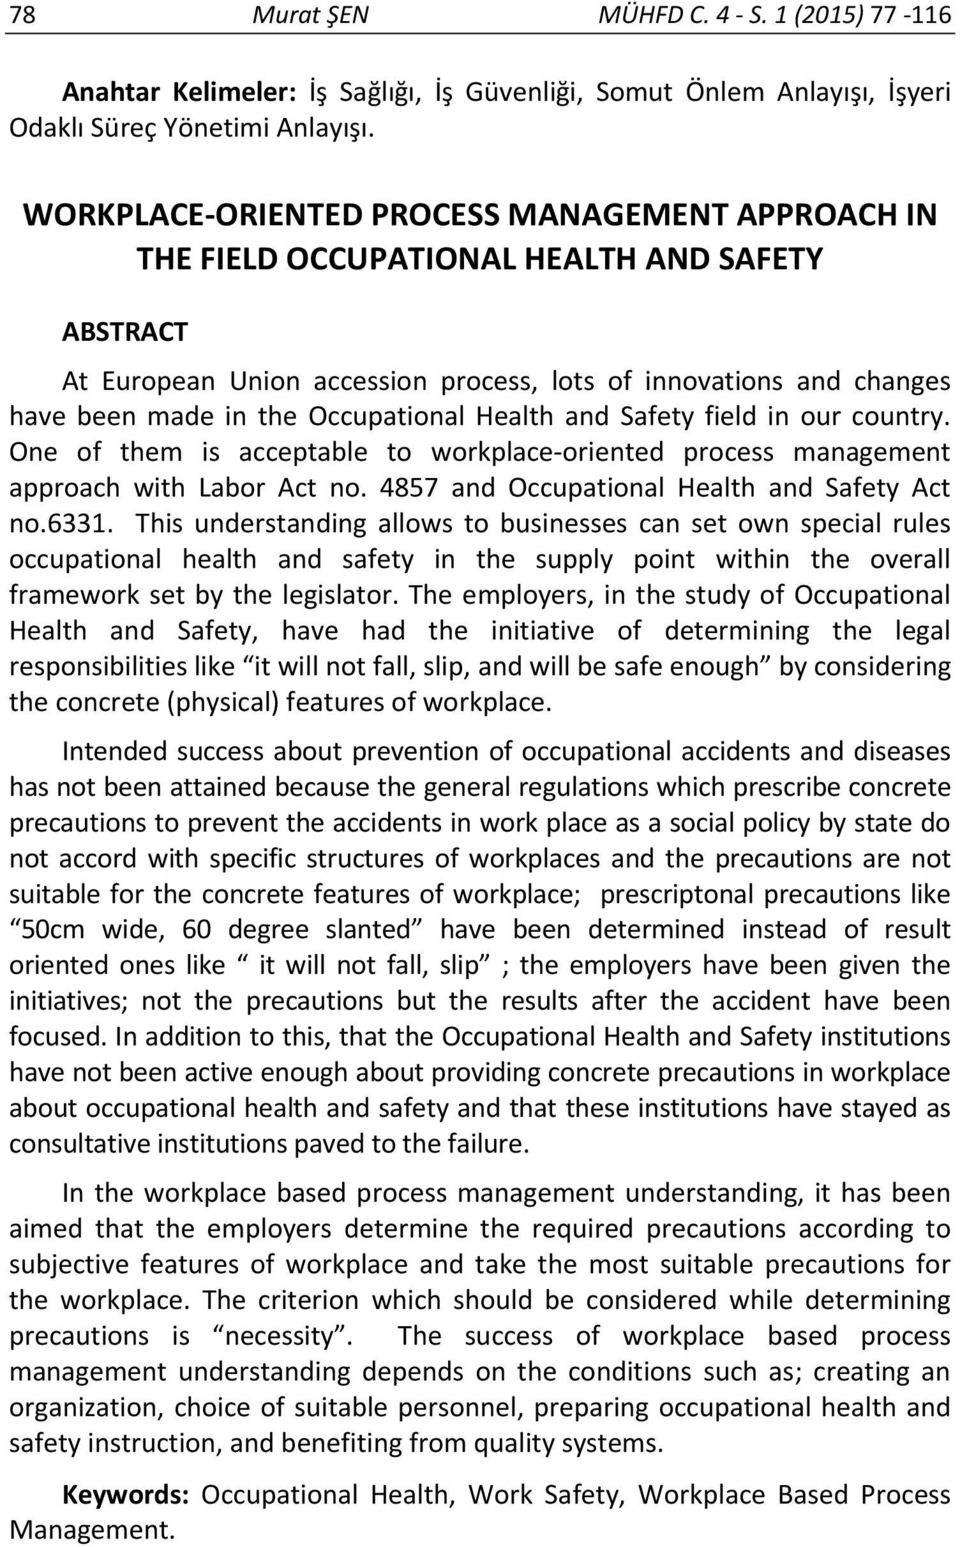 Occupational Health and Safety field in our country. One of them is acceptable to workplace-oriented process management approach with Labor Act no. 4857 and Occupational Health and Safety Act no.6331.